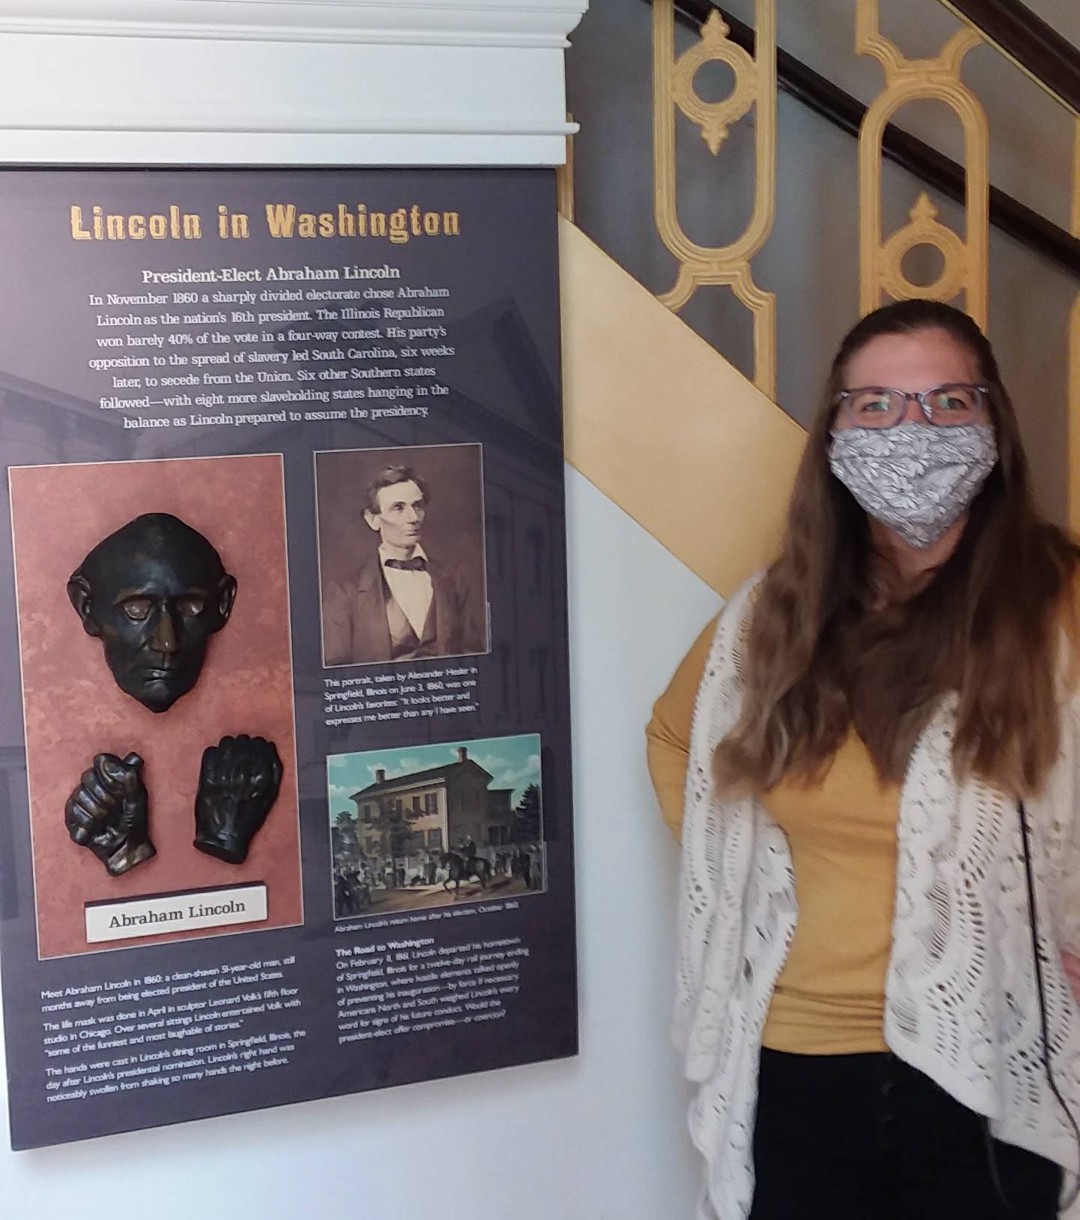 Taryn stands next to a museum panel showing a life mask of Abraham Lincoln.